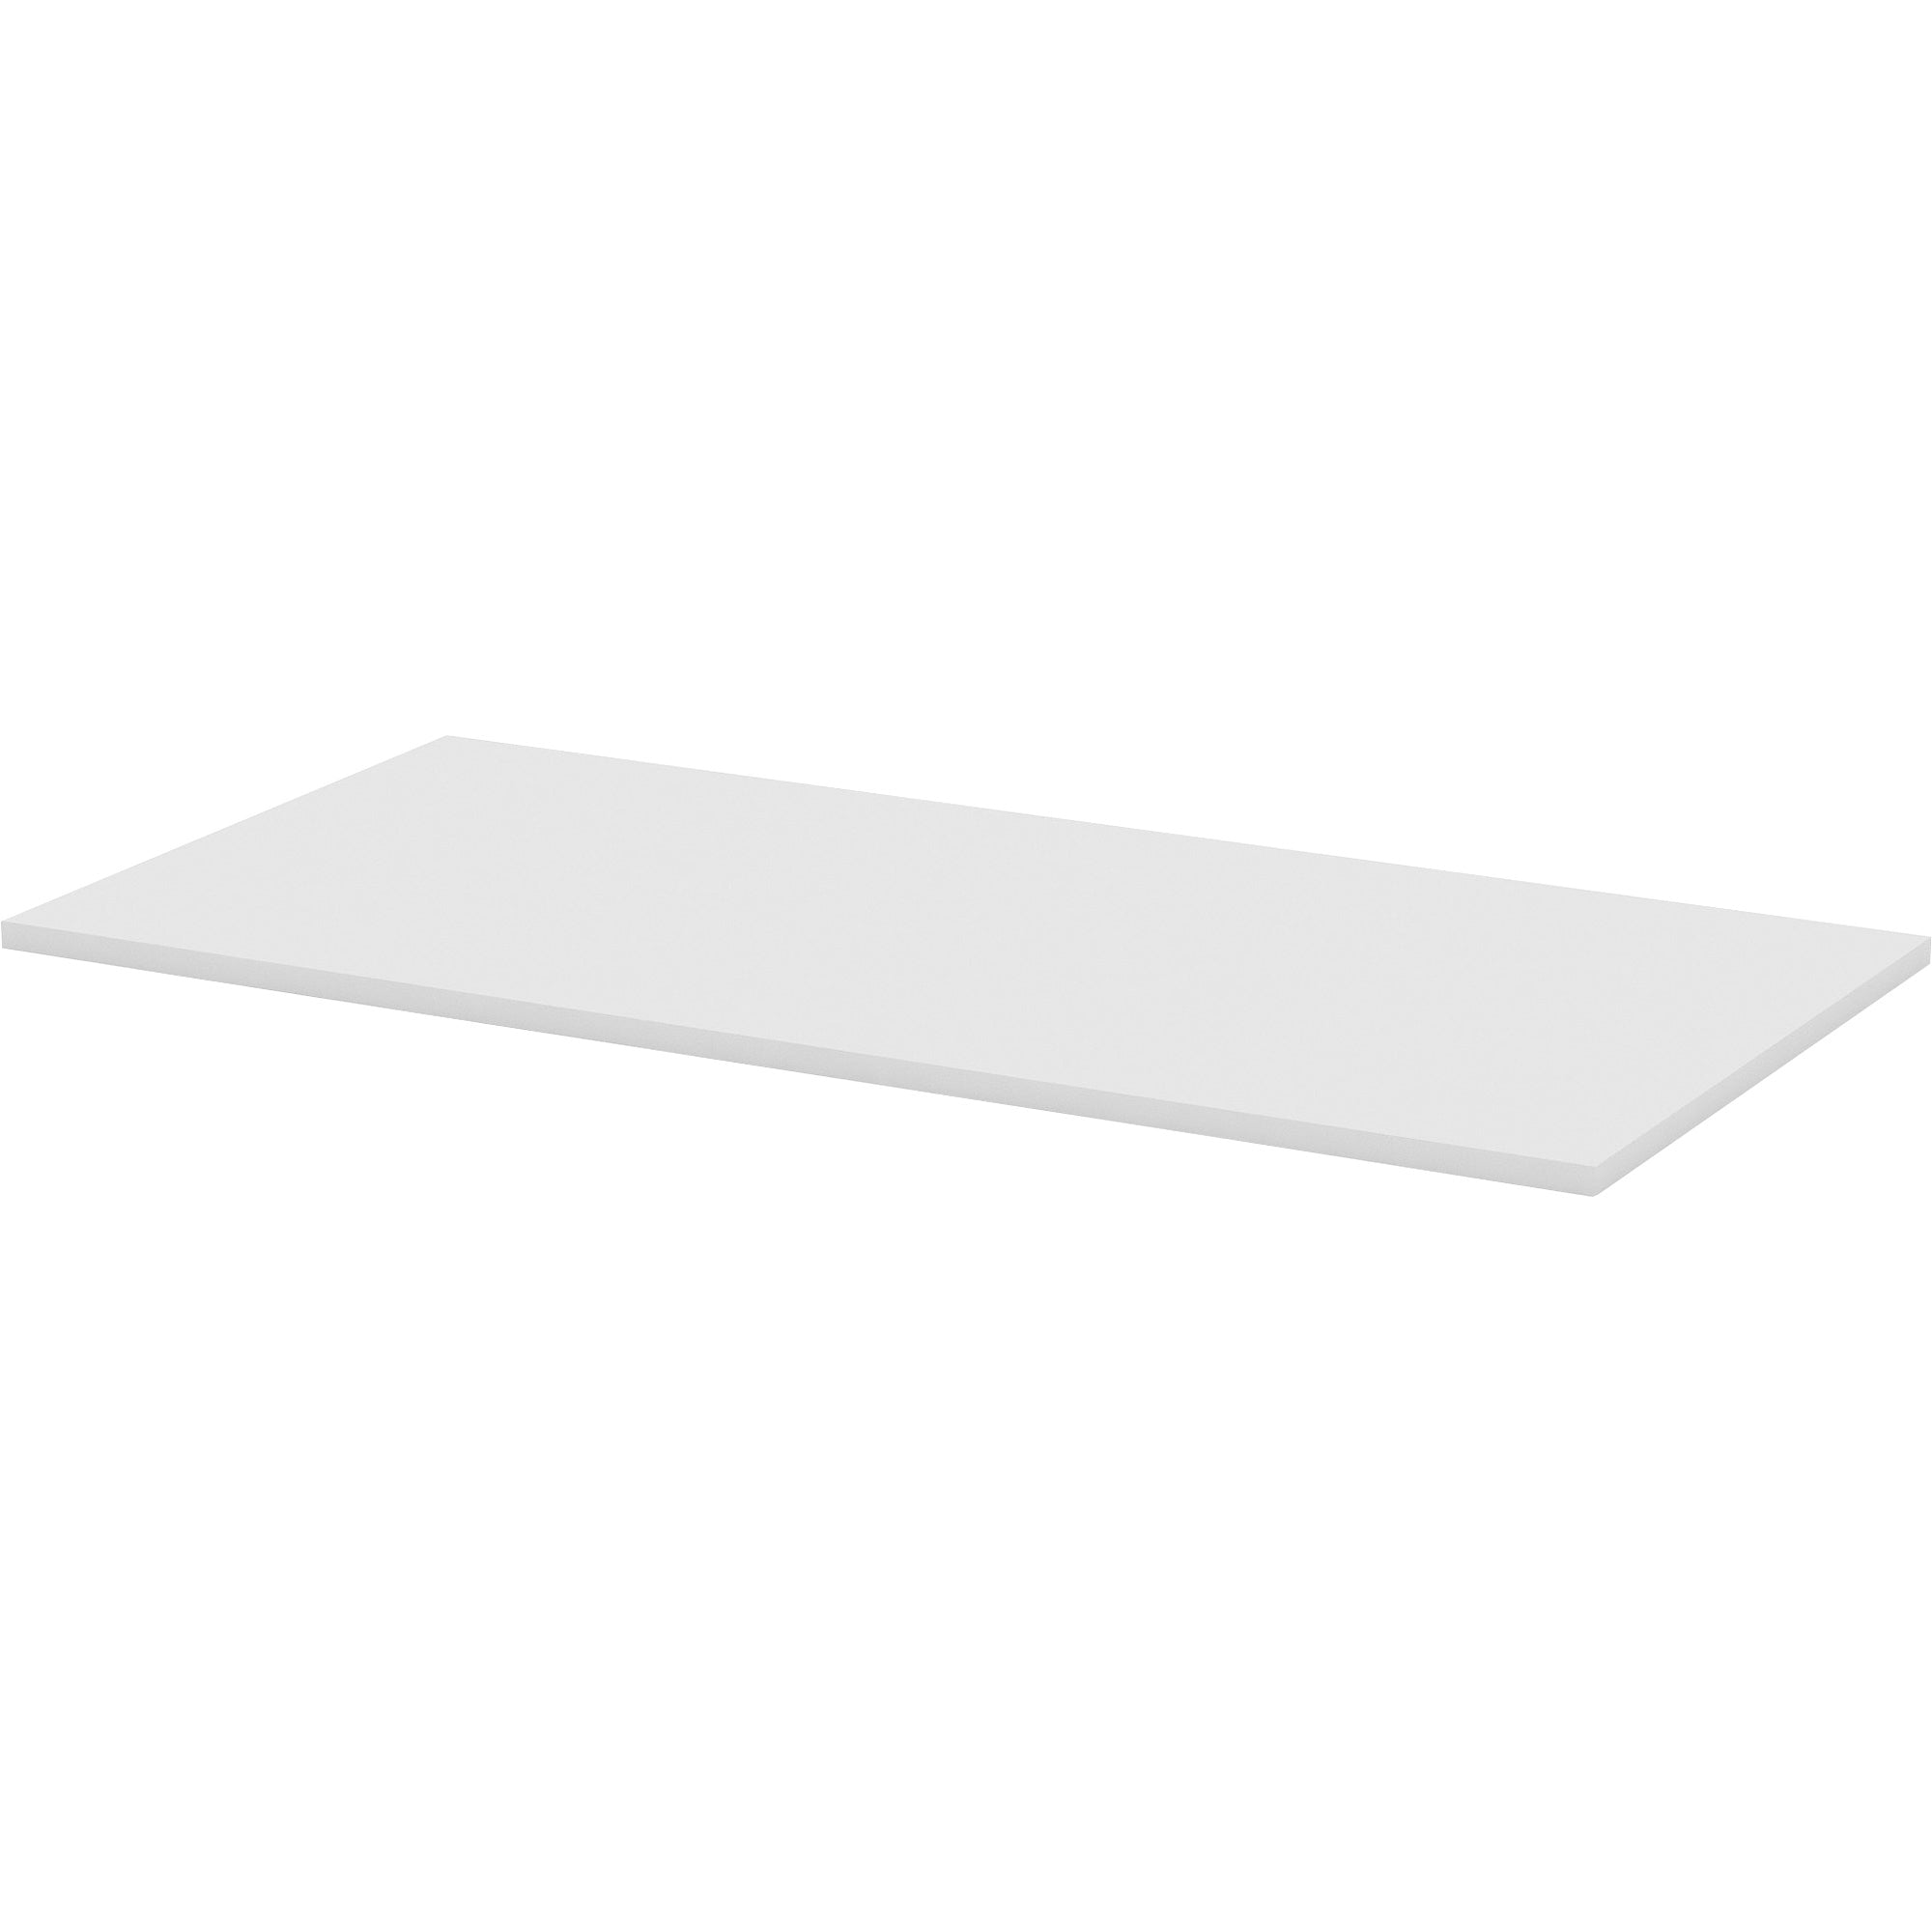 lorell-training-tabletop-for-table-topwhite-rectangle-top-60-table-top-length-x-30-table-top-width-x-1-table-top-thickness-assembly-required-1-each_llr62557 - 1